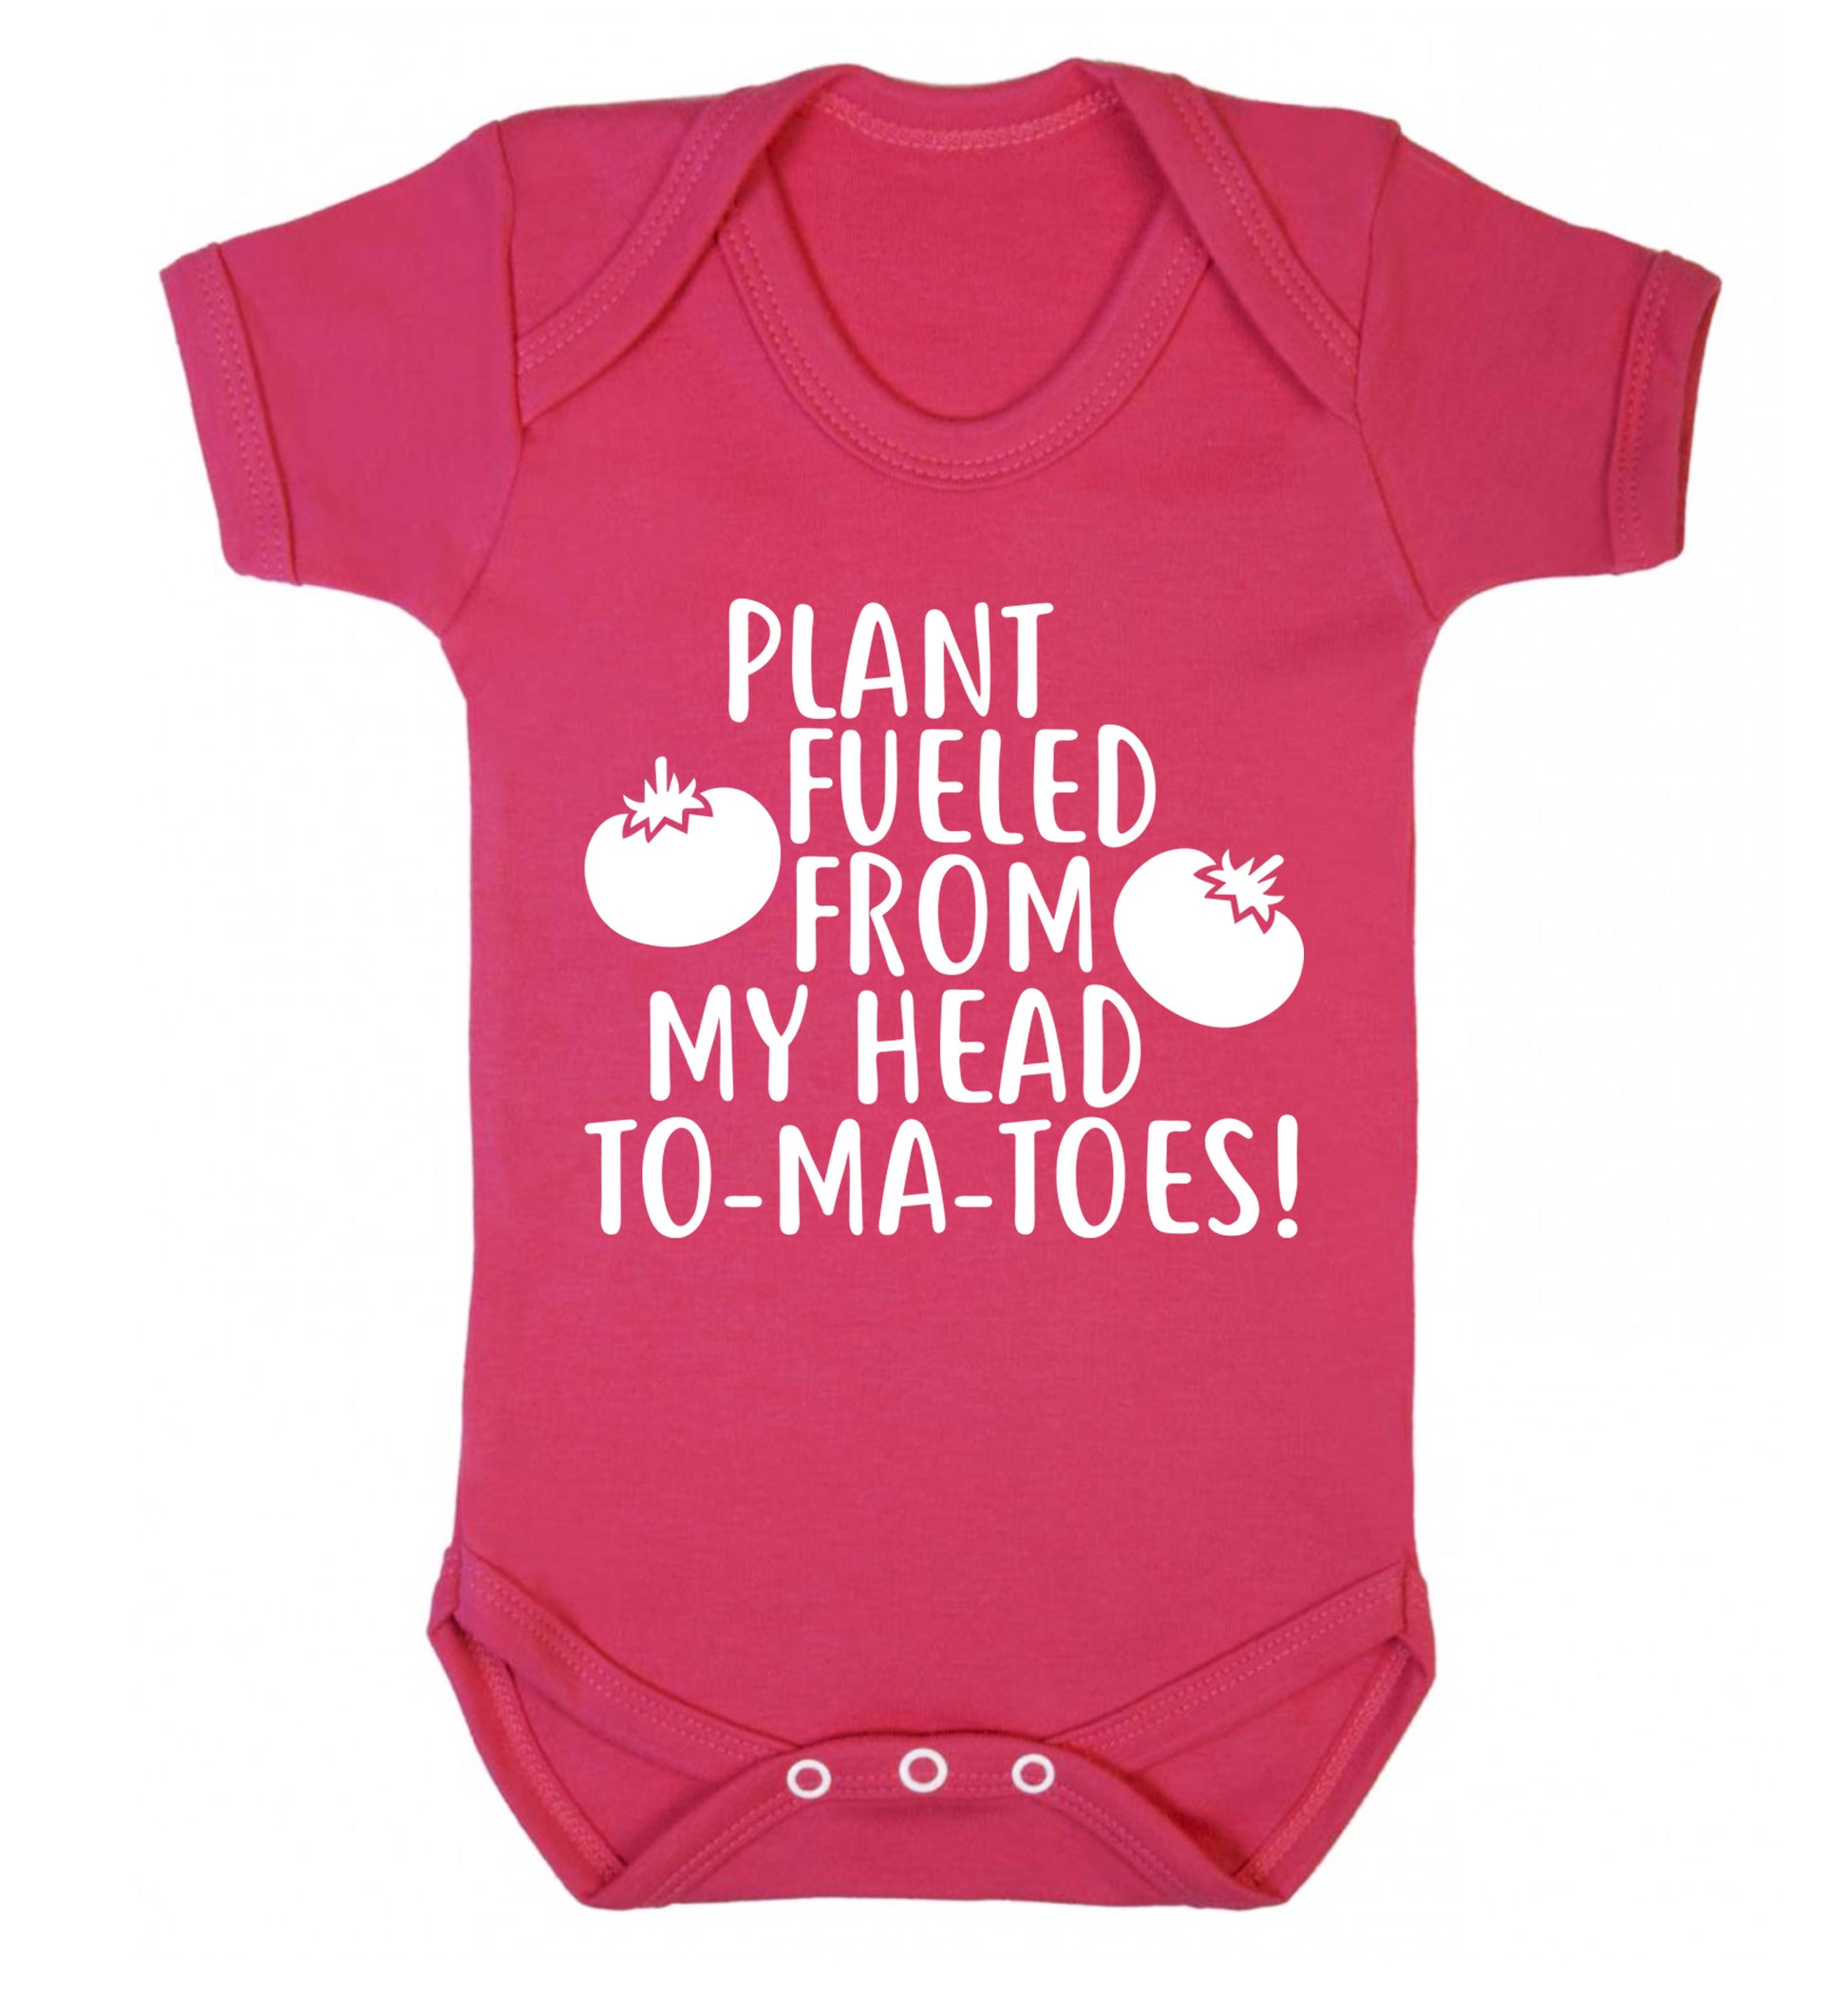 Plant fueled from my head to-ma-toes Baby Vest dark pink 18-24 months